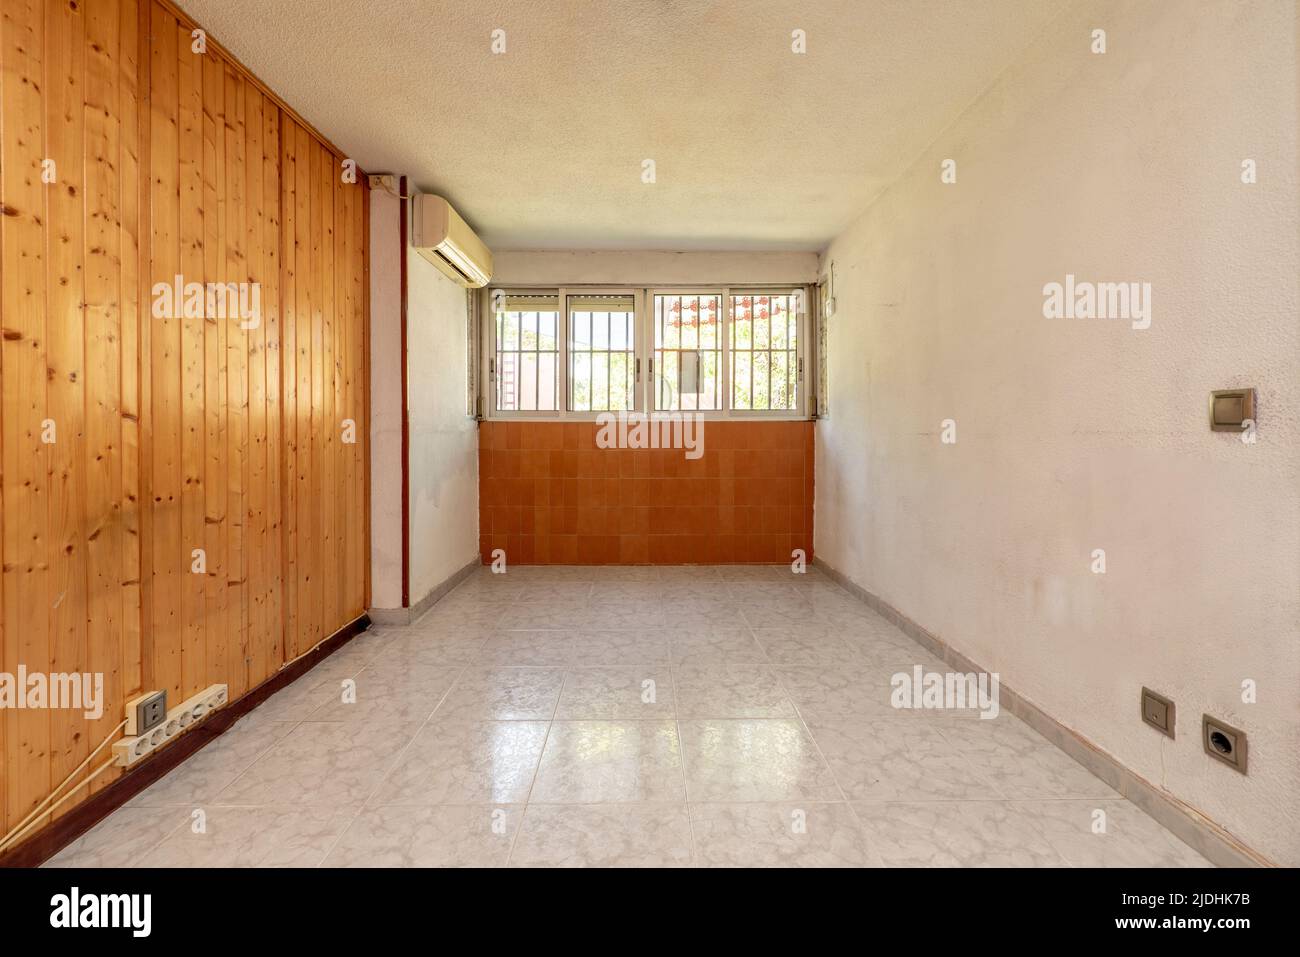 Empty room with aluminum windows and air conditioning with ceramic floors and a wall with brown tiles Stock Photo